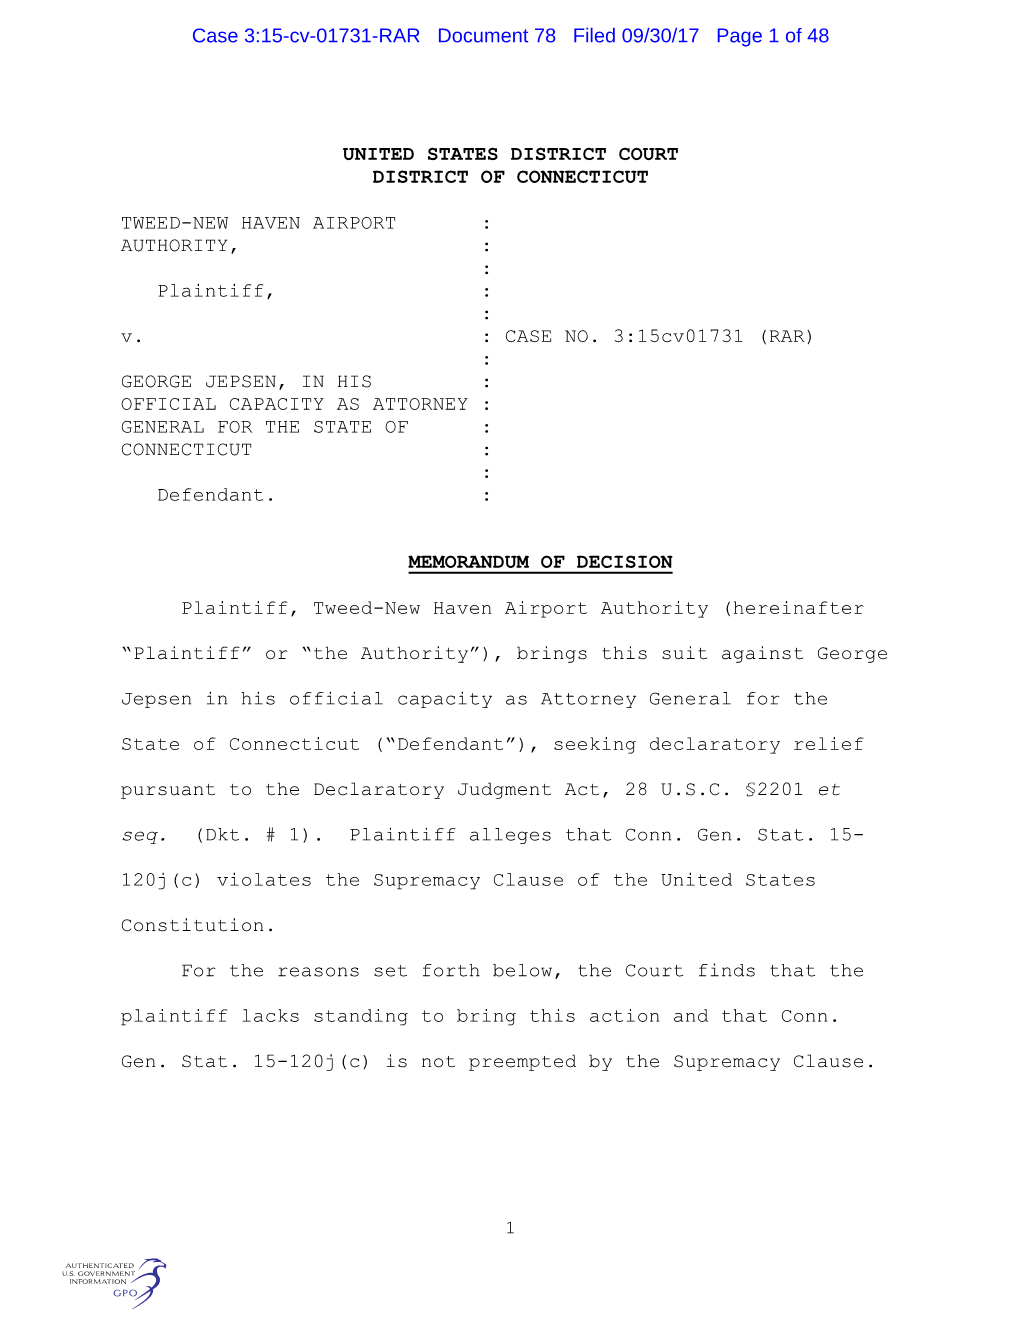 UNITED STATES DISTRICT COURT DISTRICT of CONNECTICUT TWEED-NEW HAVEN AIRPORT : AUTHORITY, : : Plaintiff, : : V. : CASE NO. 3